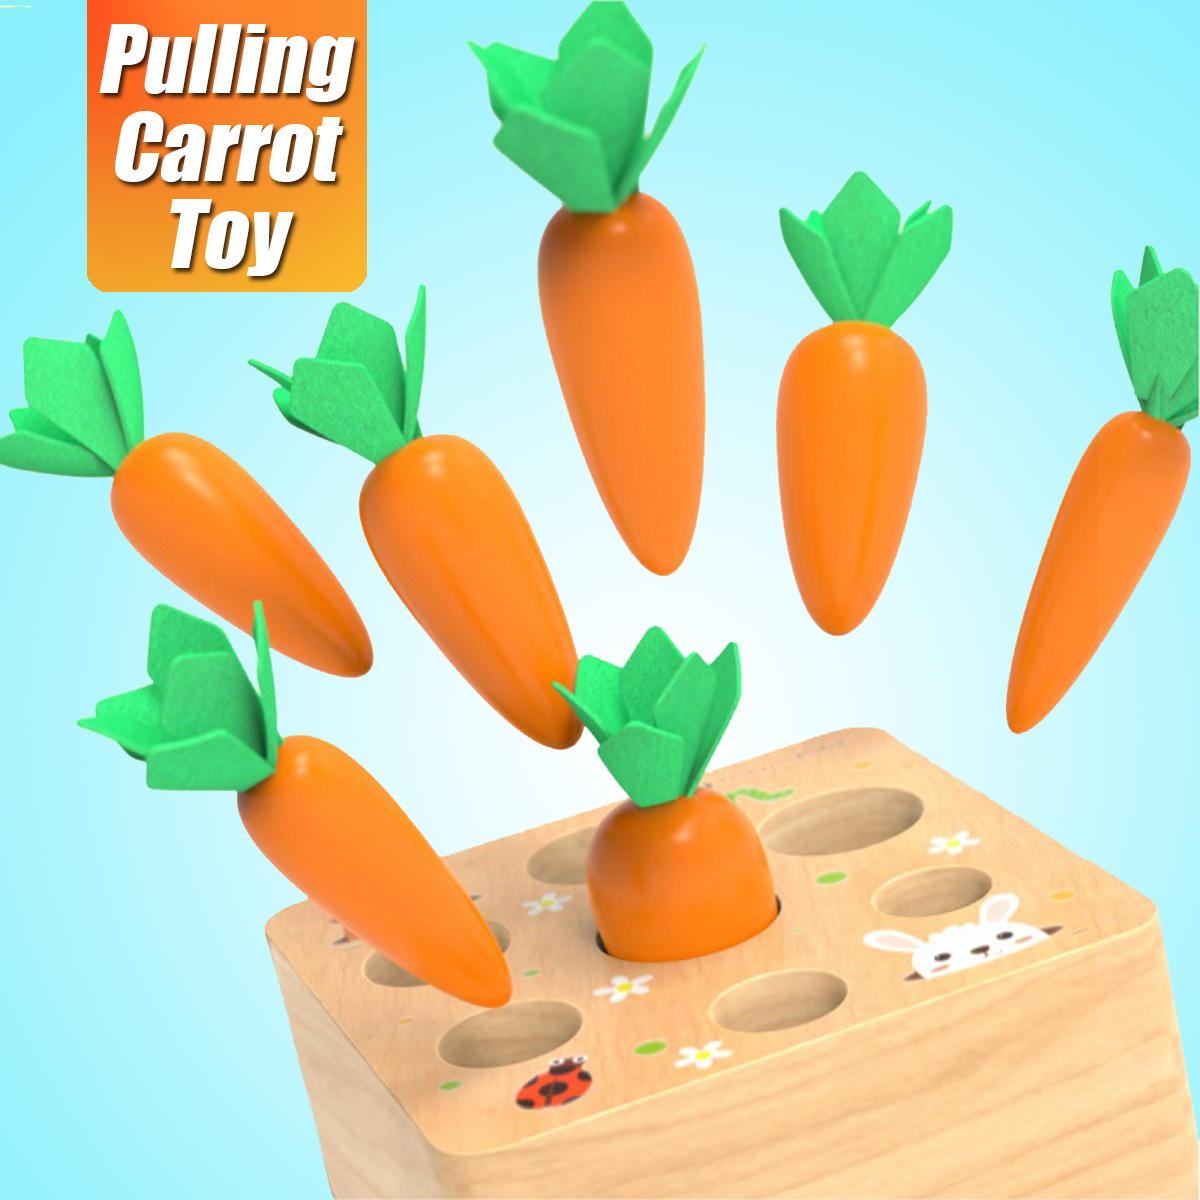 Kids-Wooden-Building-Blocks-Pulling-Carrot-Game-Children-Early-Educational-Toys-1676982-2